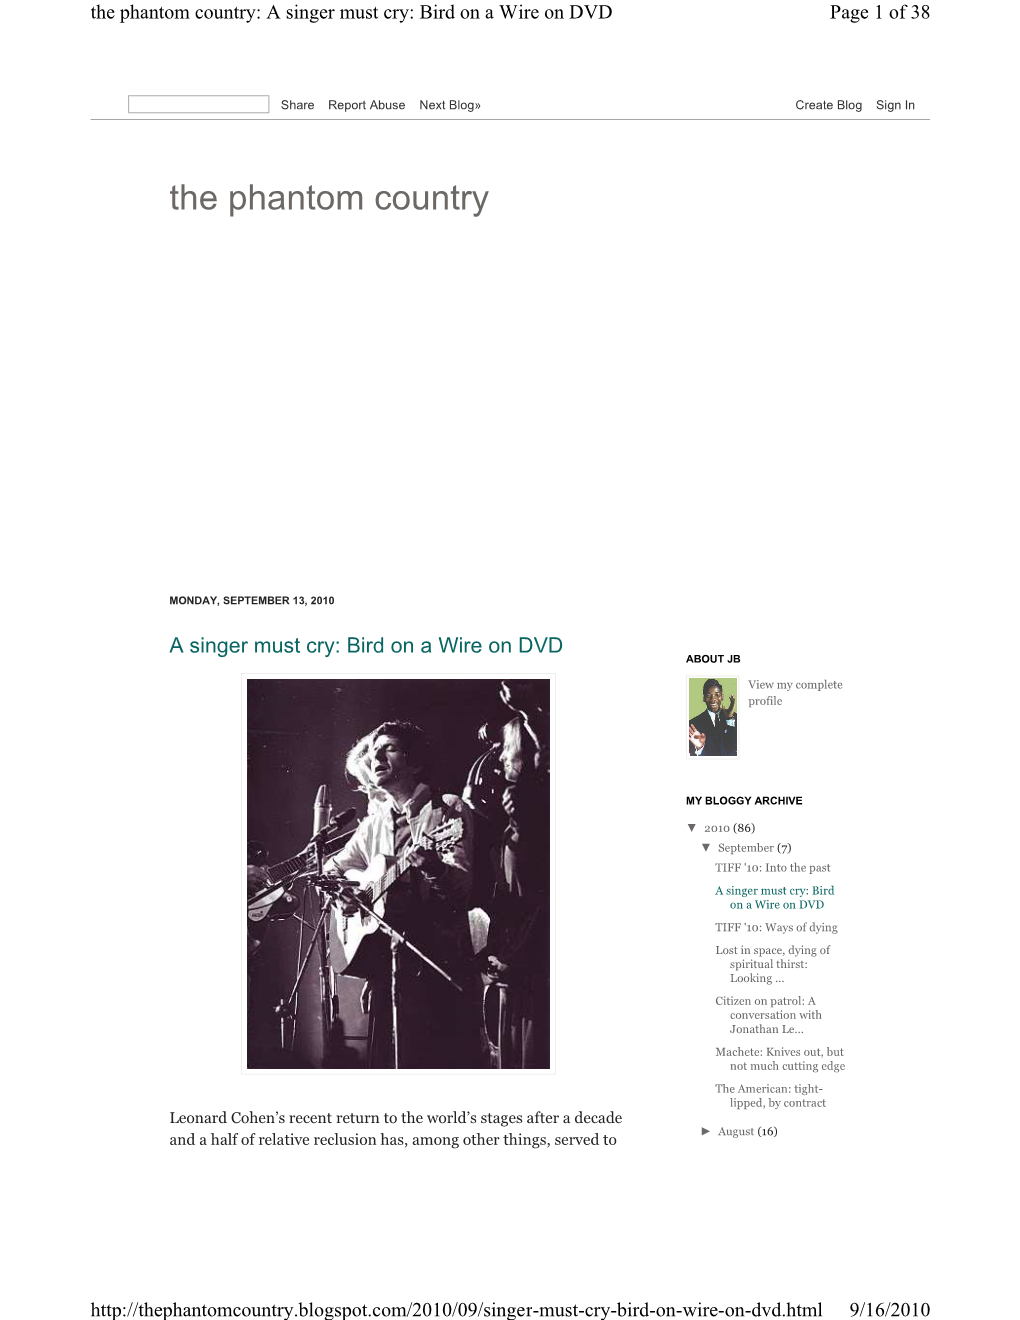 The Phantom Country: a Singer Must Cry: Bird on a Wire on DVD Page 1 of 38